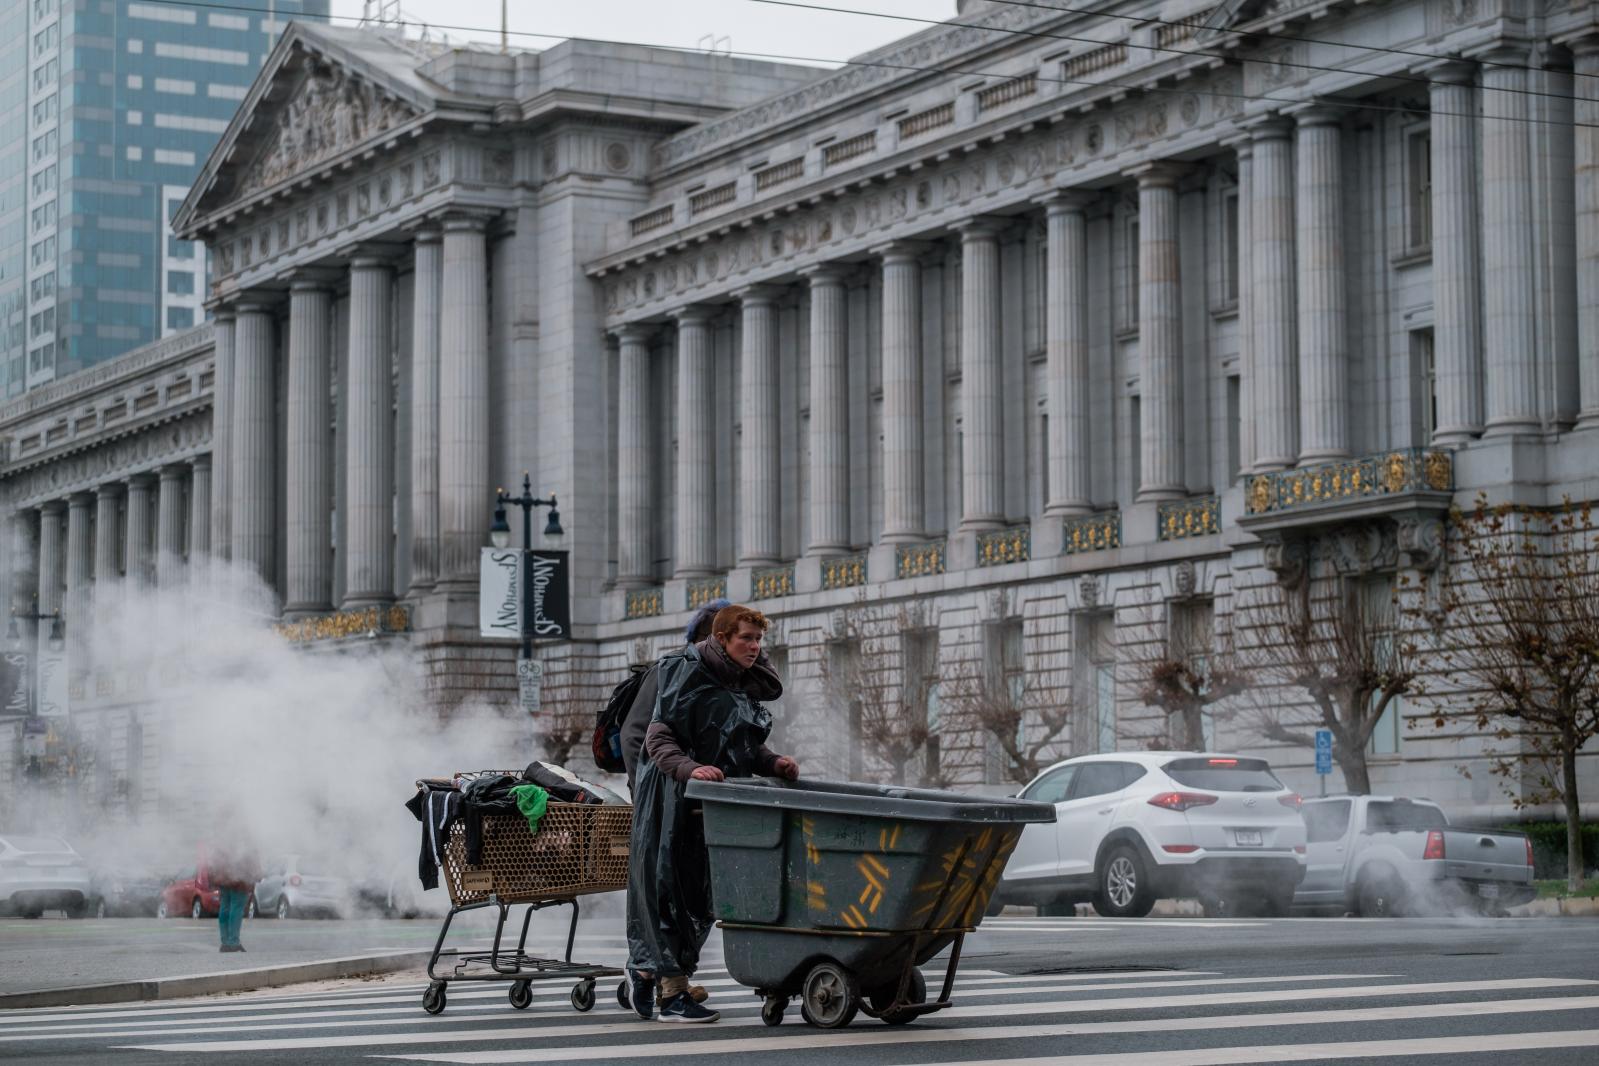 Image from NEWS FEATURES - Homeless folks cross the street with their belongings...